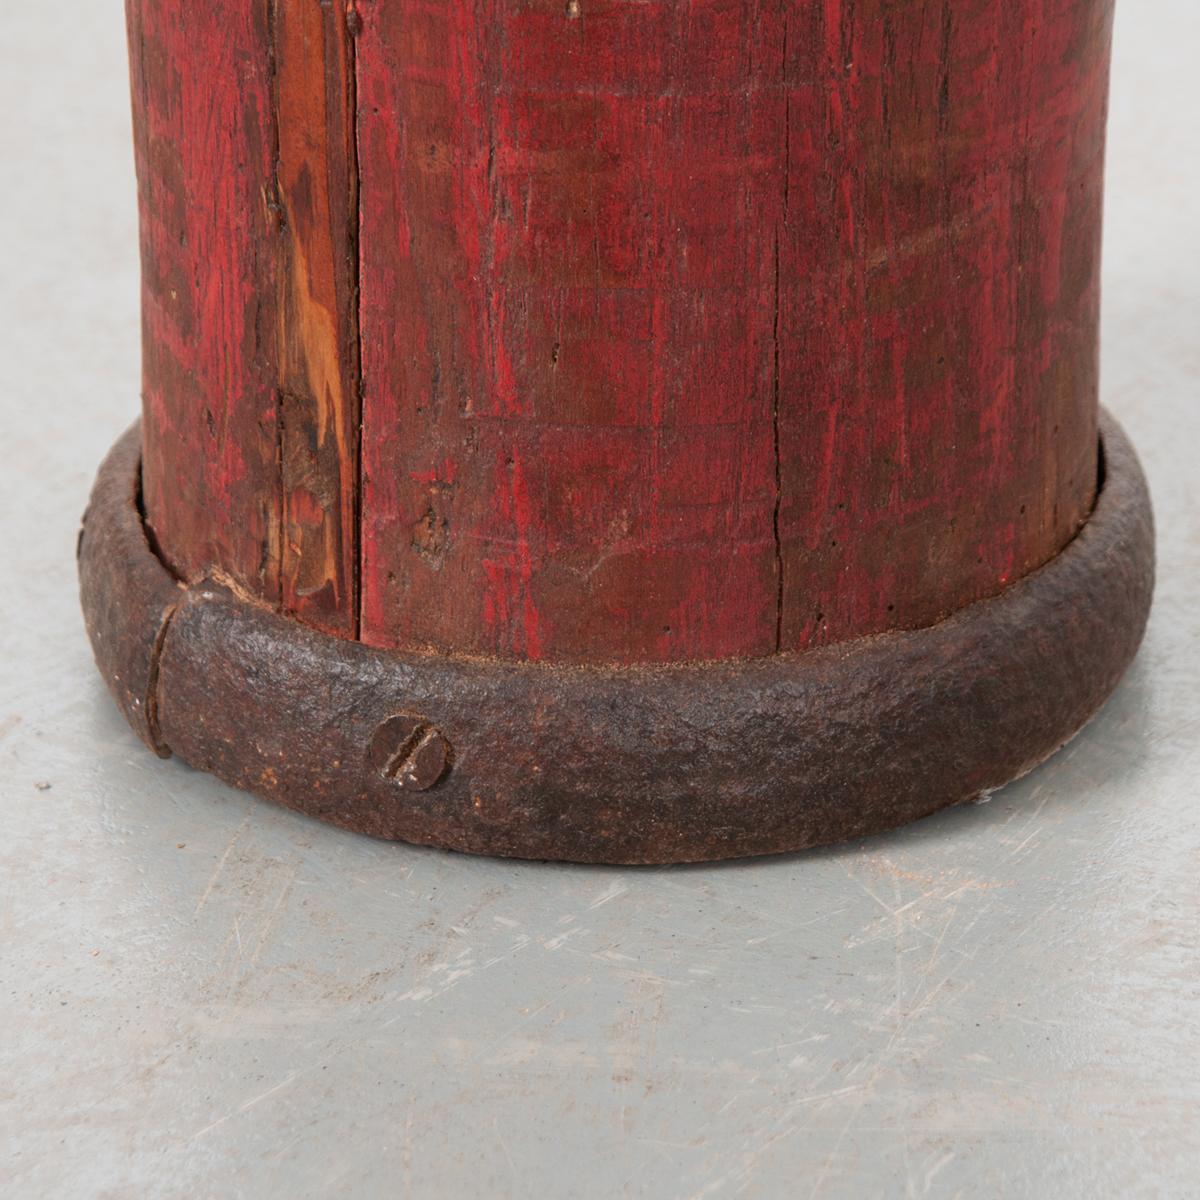 This is a shaped wood column with a round top that has been painted red. An interesting conversation piece or sculpture that would add whimsy to any interior. 
 